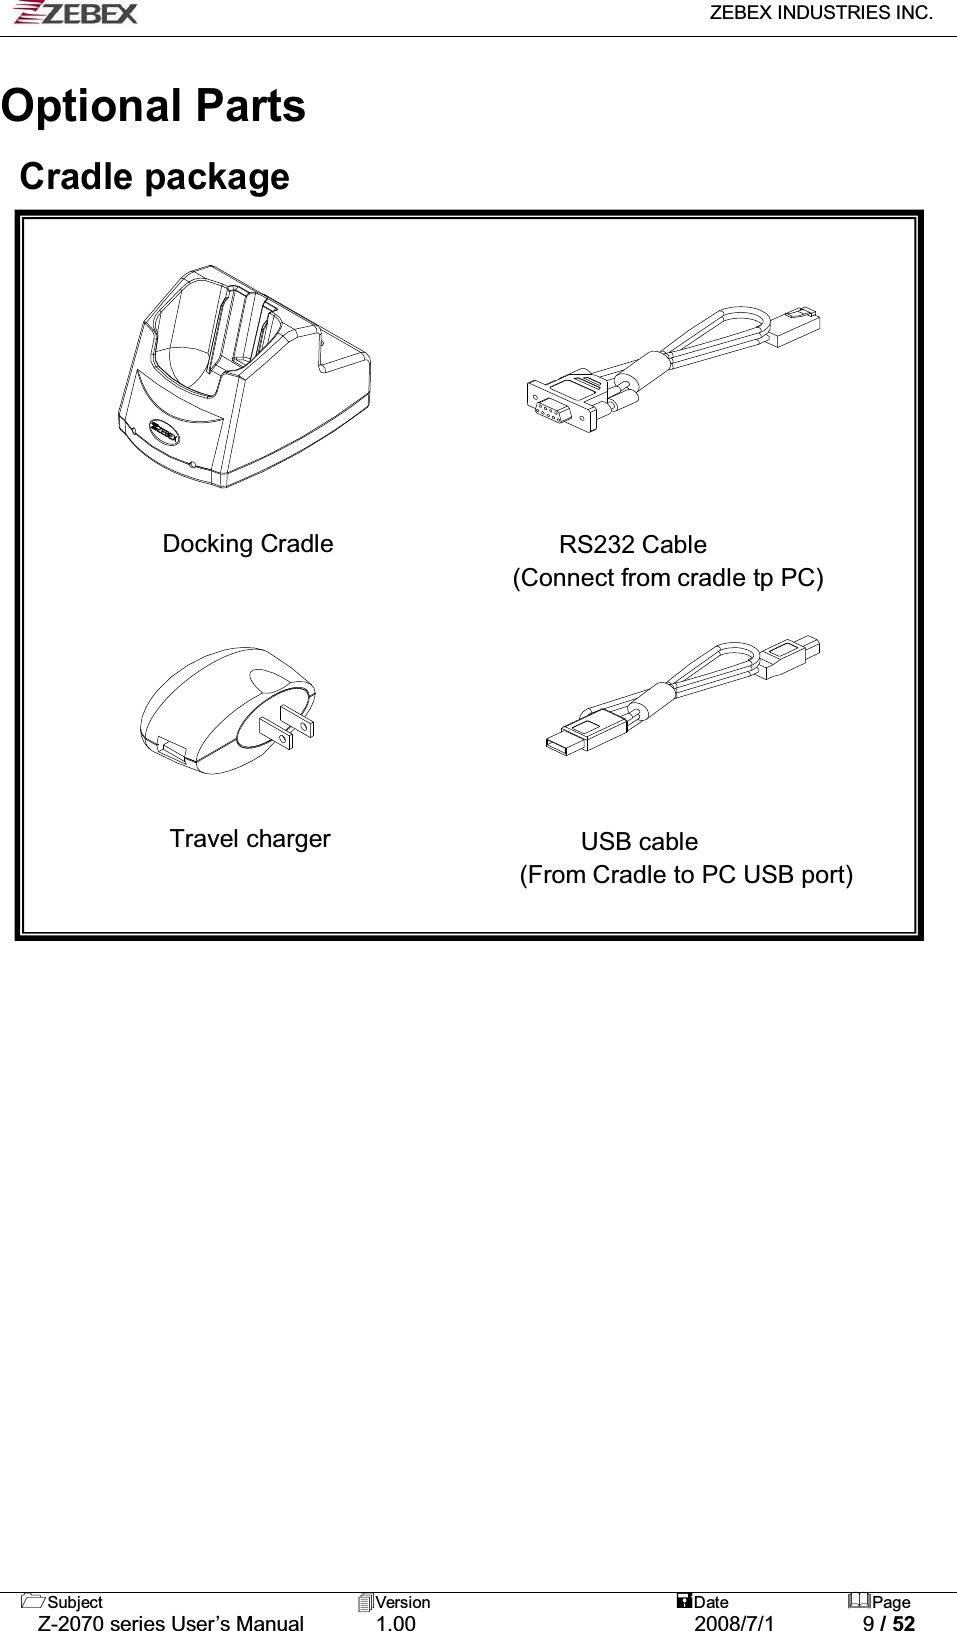   ZEBEX INDUSTRIES INC.   Subject Version  Date Page   Z-2070 series User’s Manual  1.00  2008/7/1  9 / 52                                         Optional Parts  Cradle package           Docking Cradle                  RS232 Cable (Connect from cradle tp PC)                                     Travel charger                    USB cable  (From Cradle to PC USB port)       